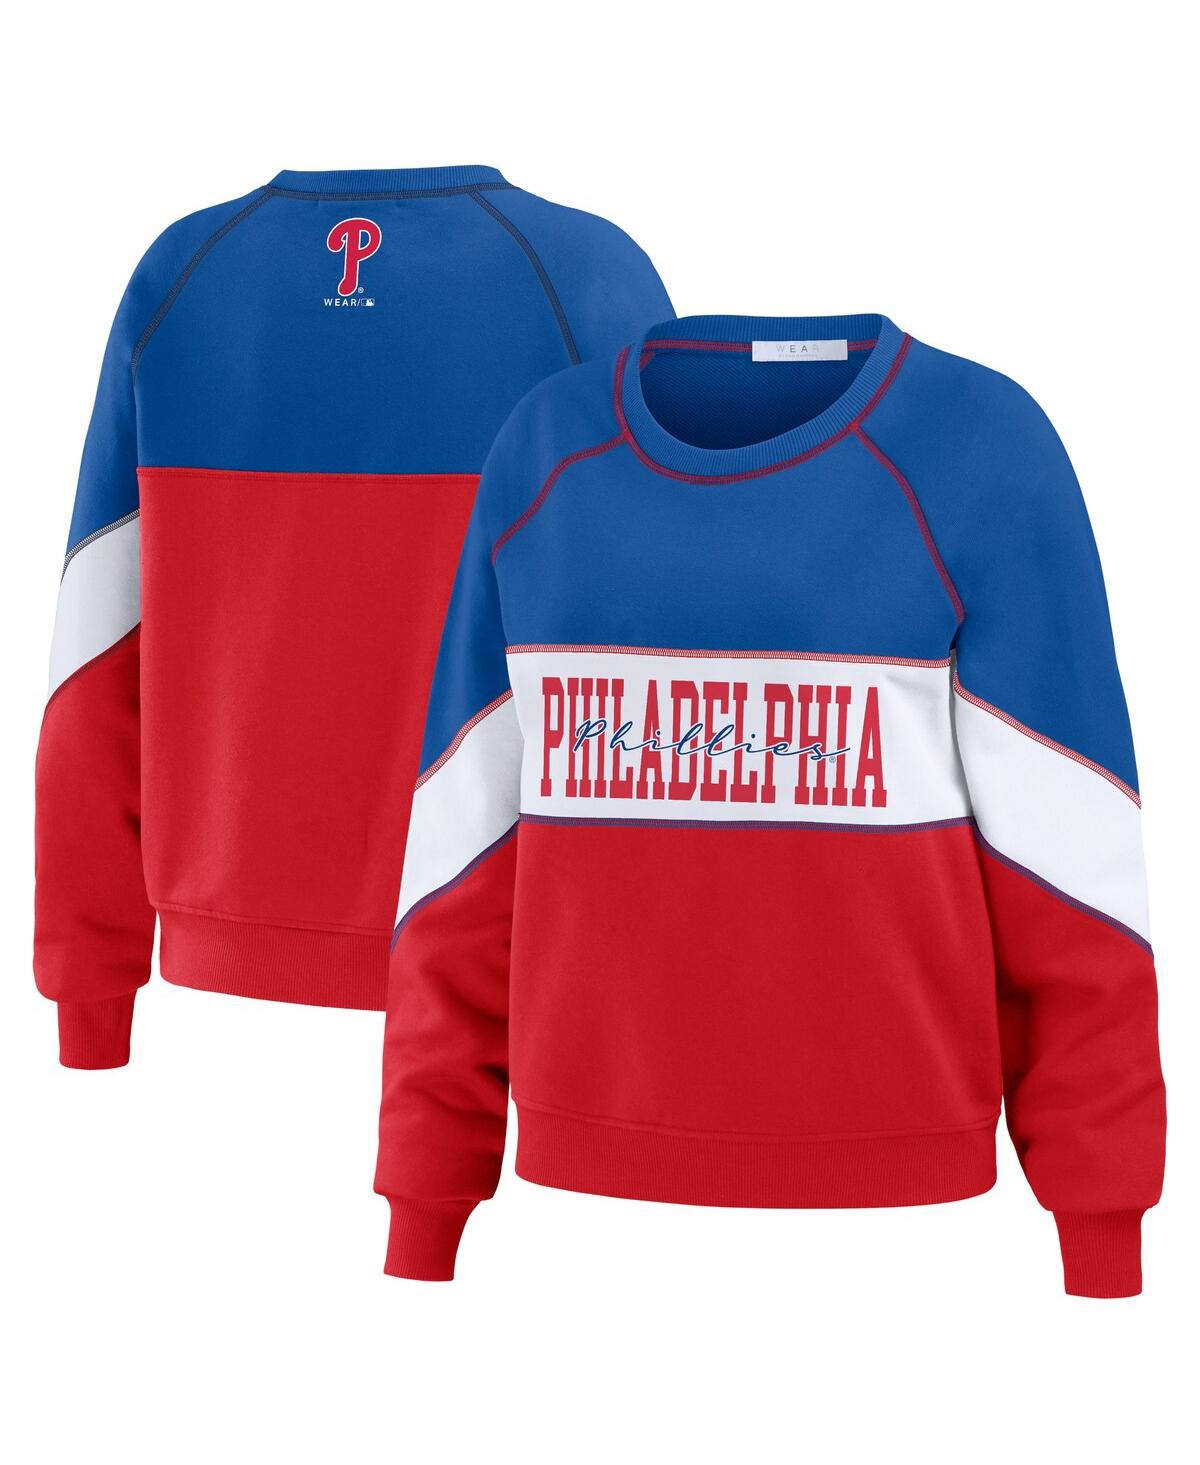 Shop Wear By Erin Andrews Women's  Royal, Red Philadelphia Phillies Crewneck Pullover Sweatshirt In Royal,red